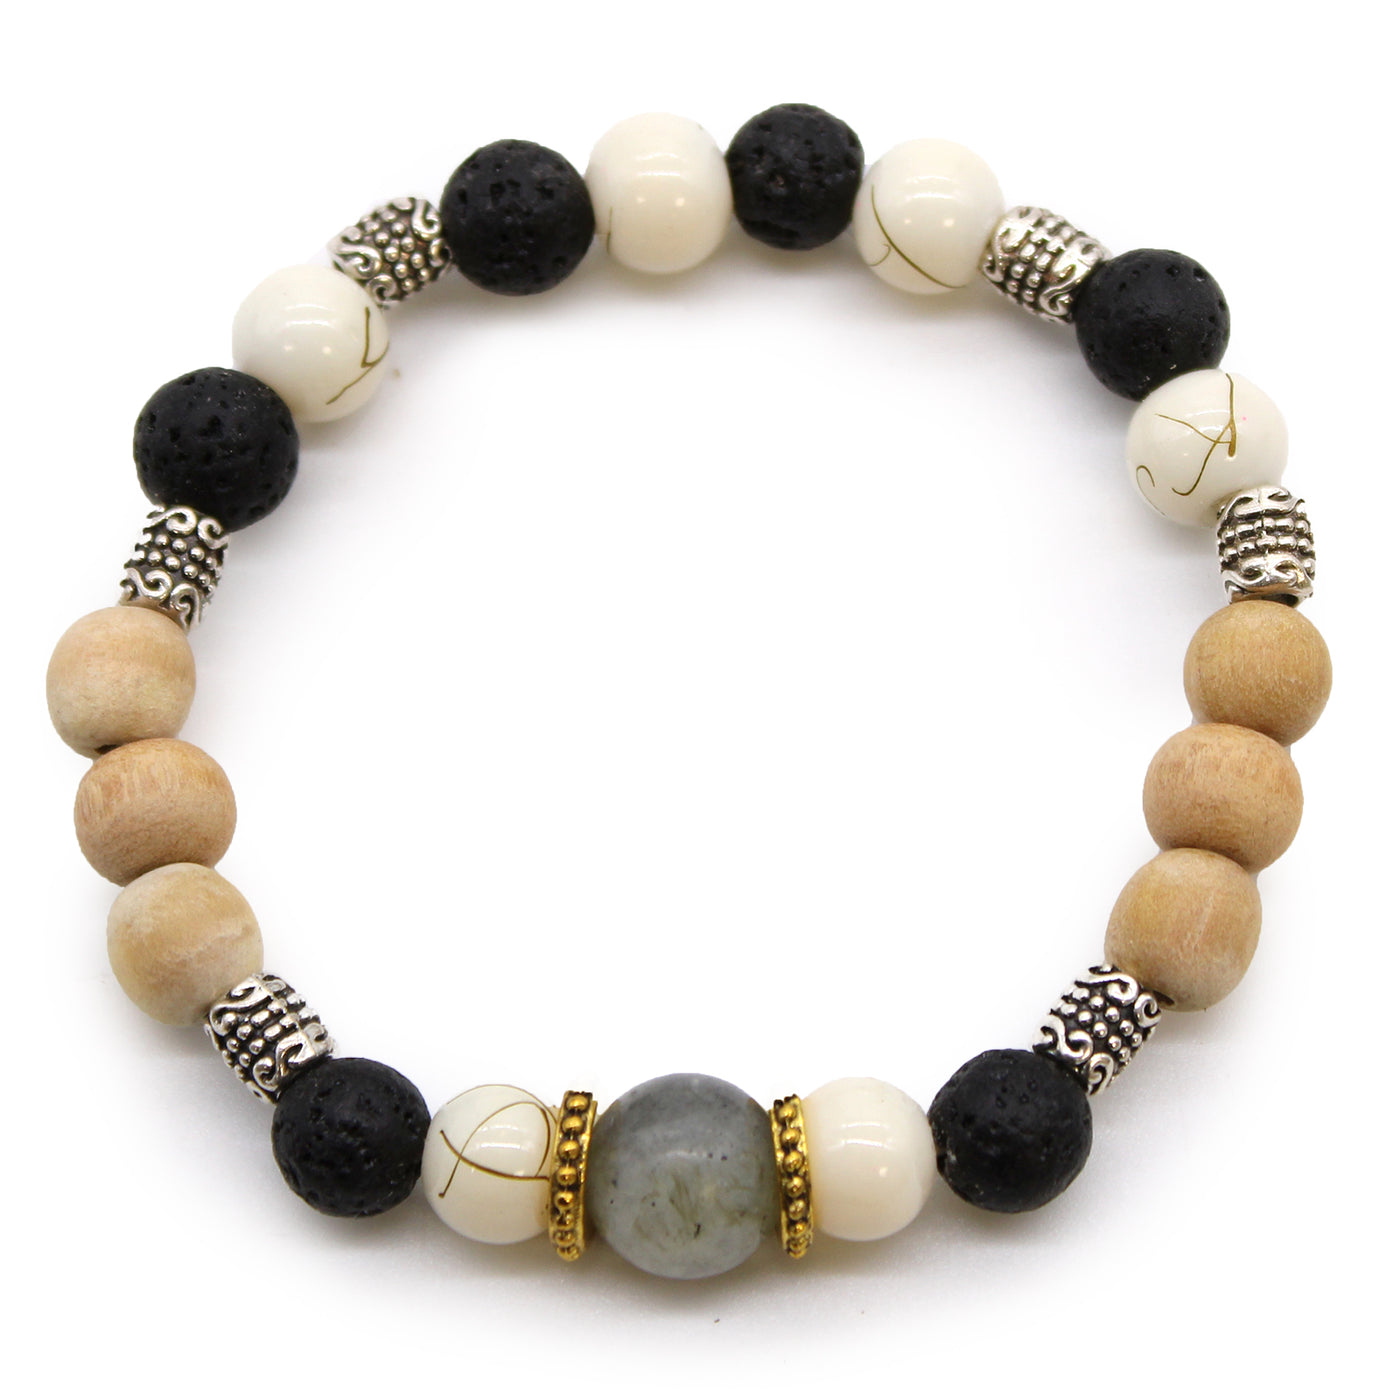  Balance Women's Bracelet With Stone Glass & Wooden Beads In Gift Box 